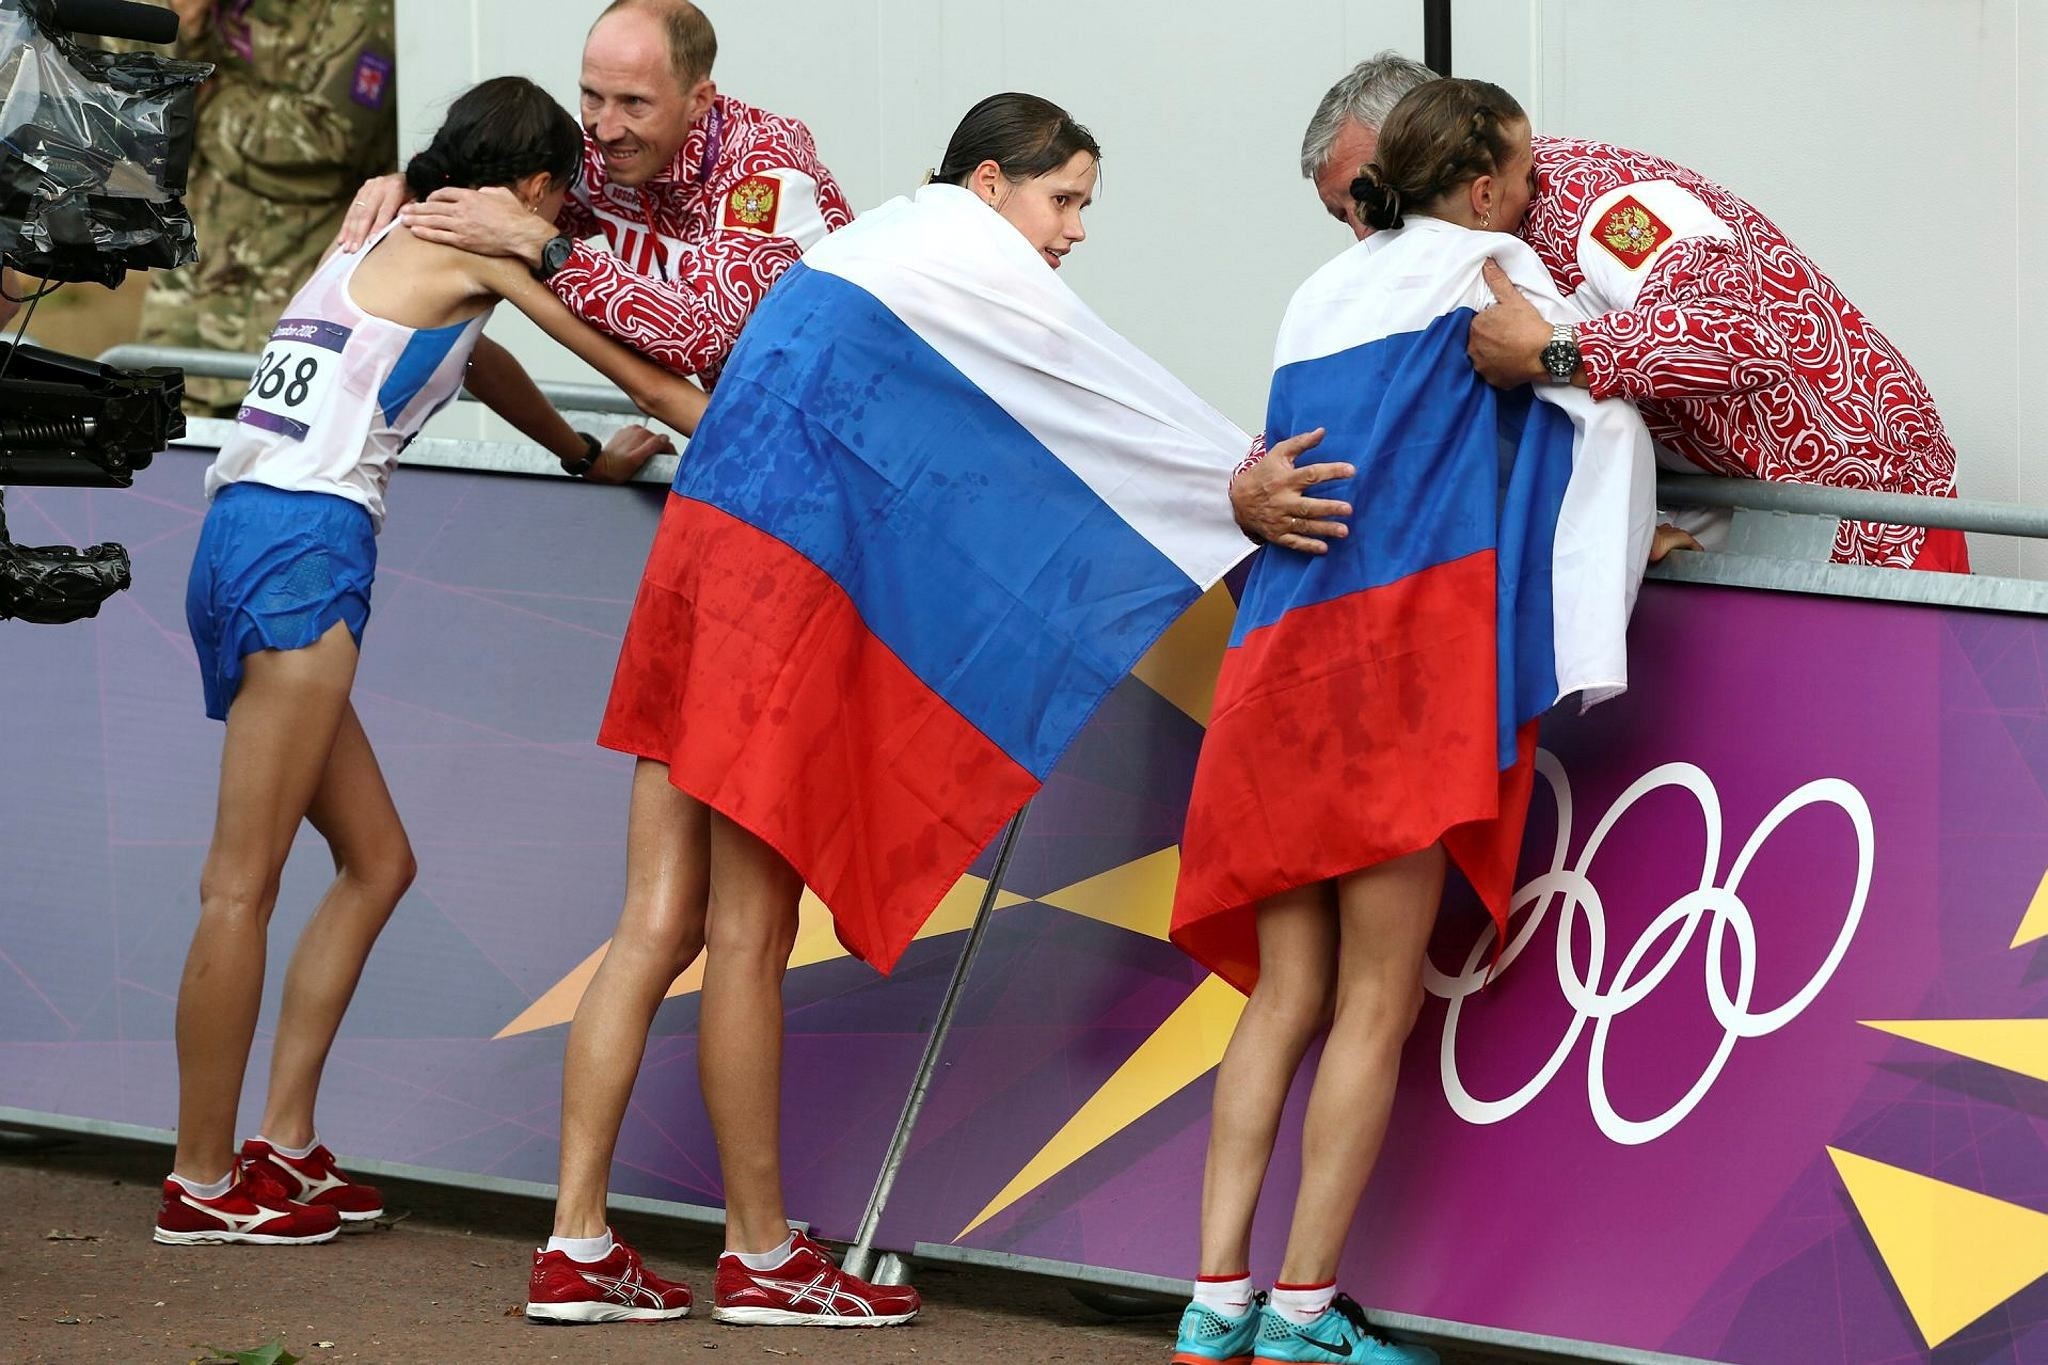 Russia coach Alexey Melnikov congratulates Olga Kaniskina, right, and Russia men's gold medalist Sergey Kirdyapkin congratulates Anisya Kirdyapkina, left, at the 2012 Summer Olympics in London. (AP Photo)